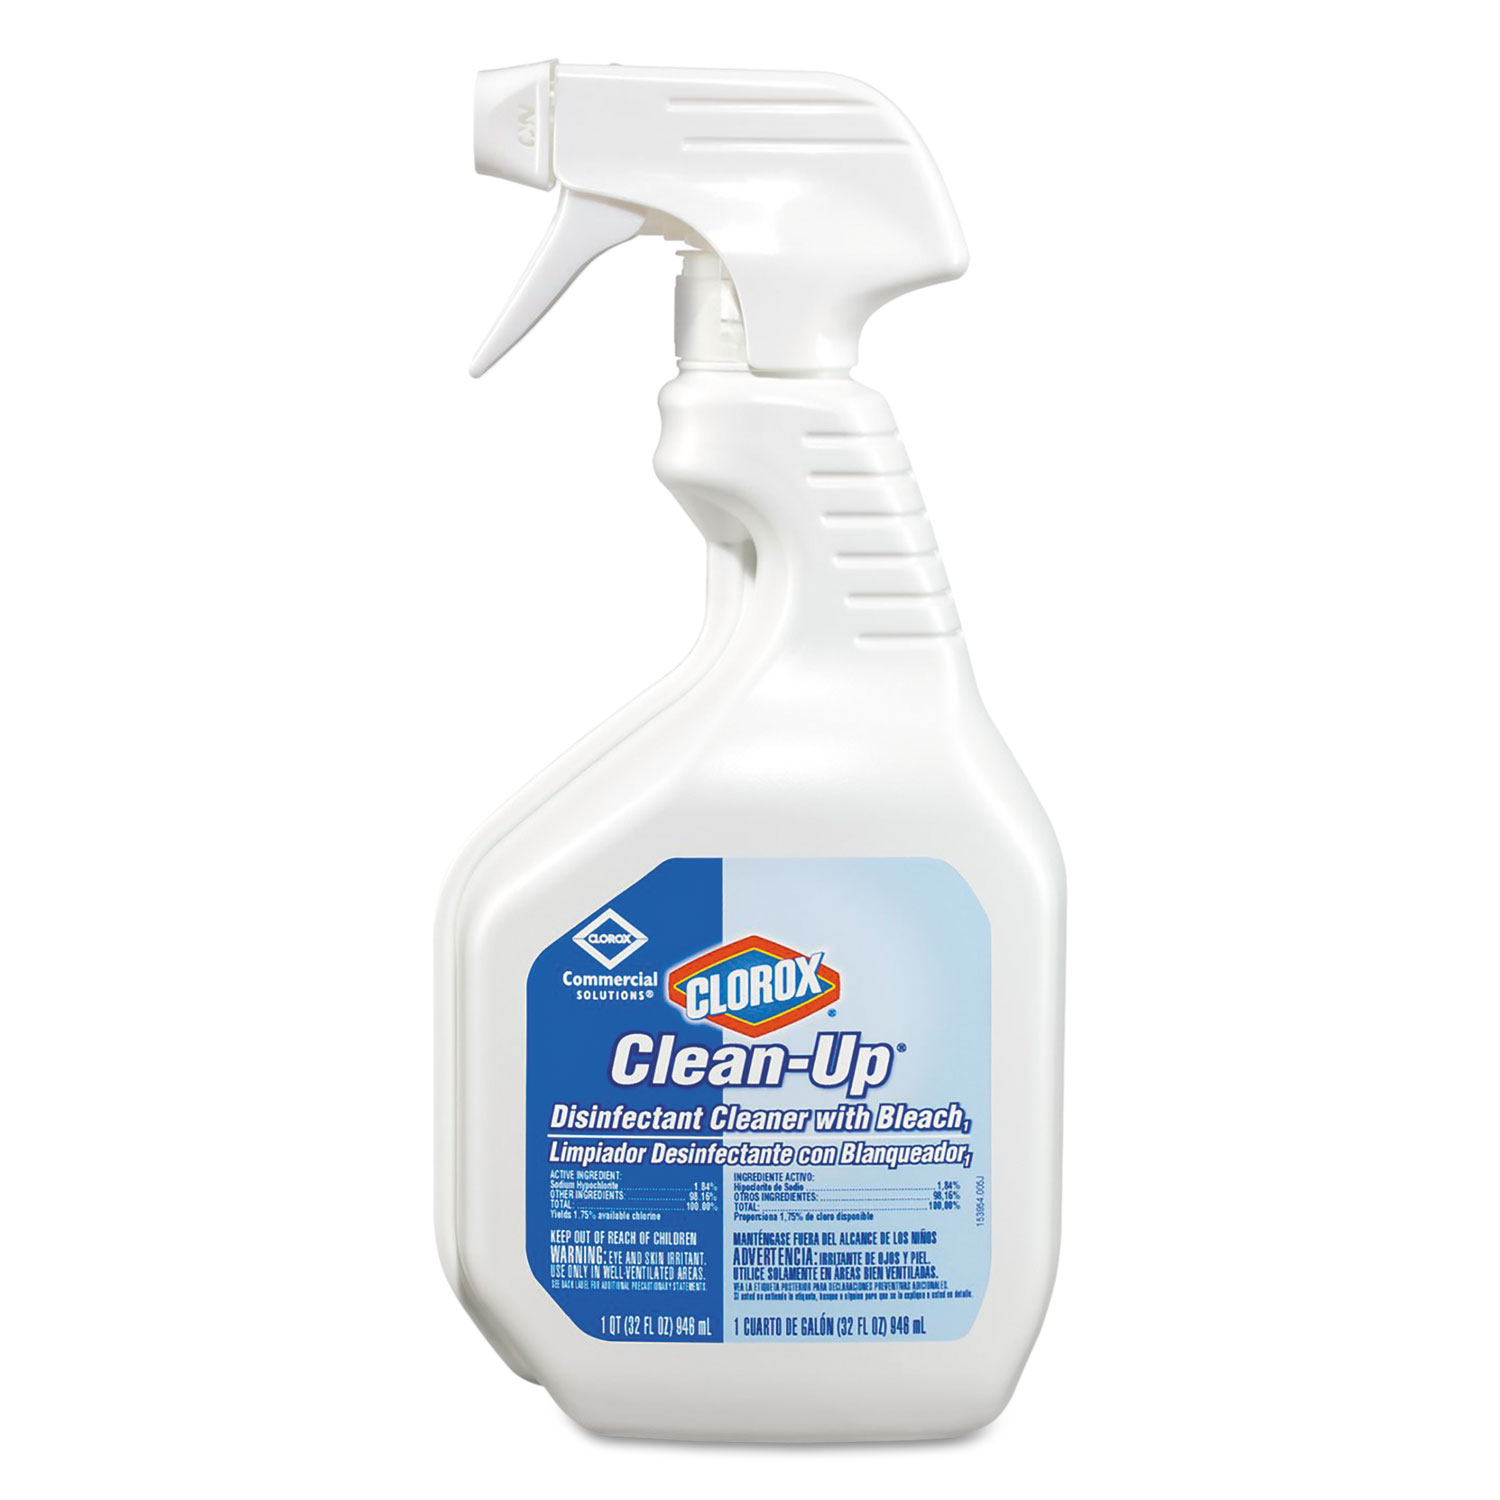  Clorox 35417 Clean-Up Disinfectant Cleaner with Bleach, 32oz Smart Tube Spray (CLO35417EA) 